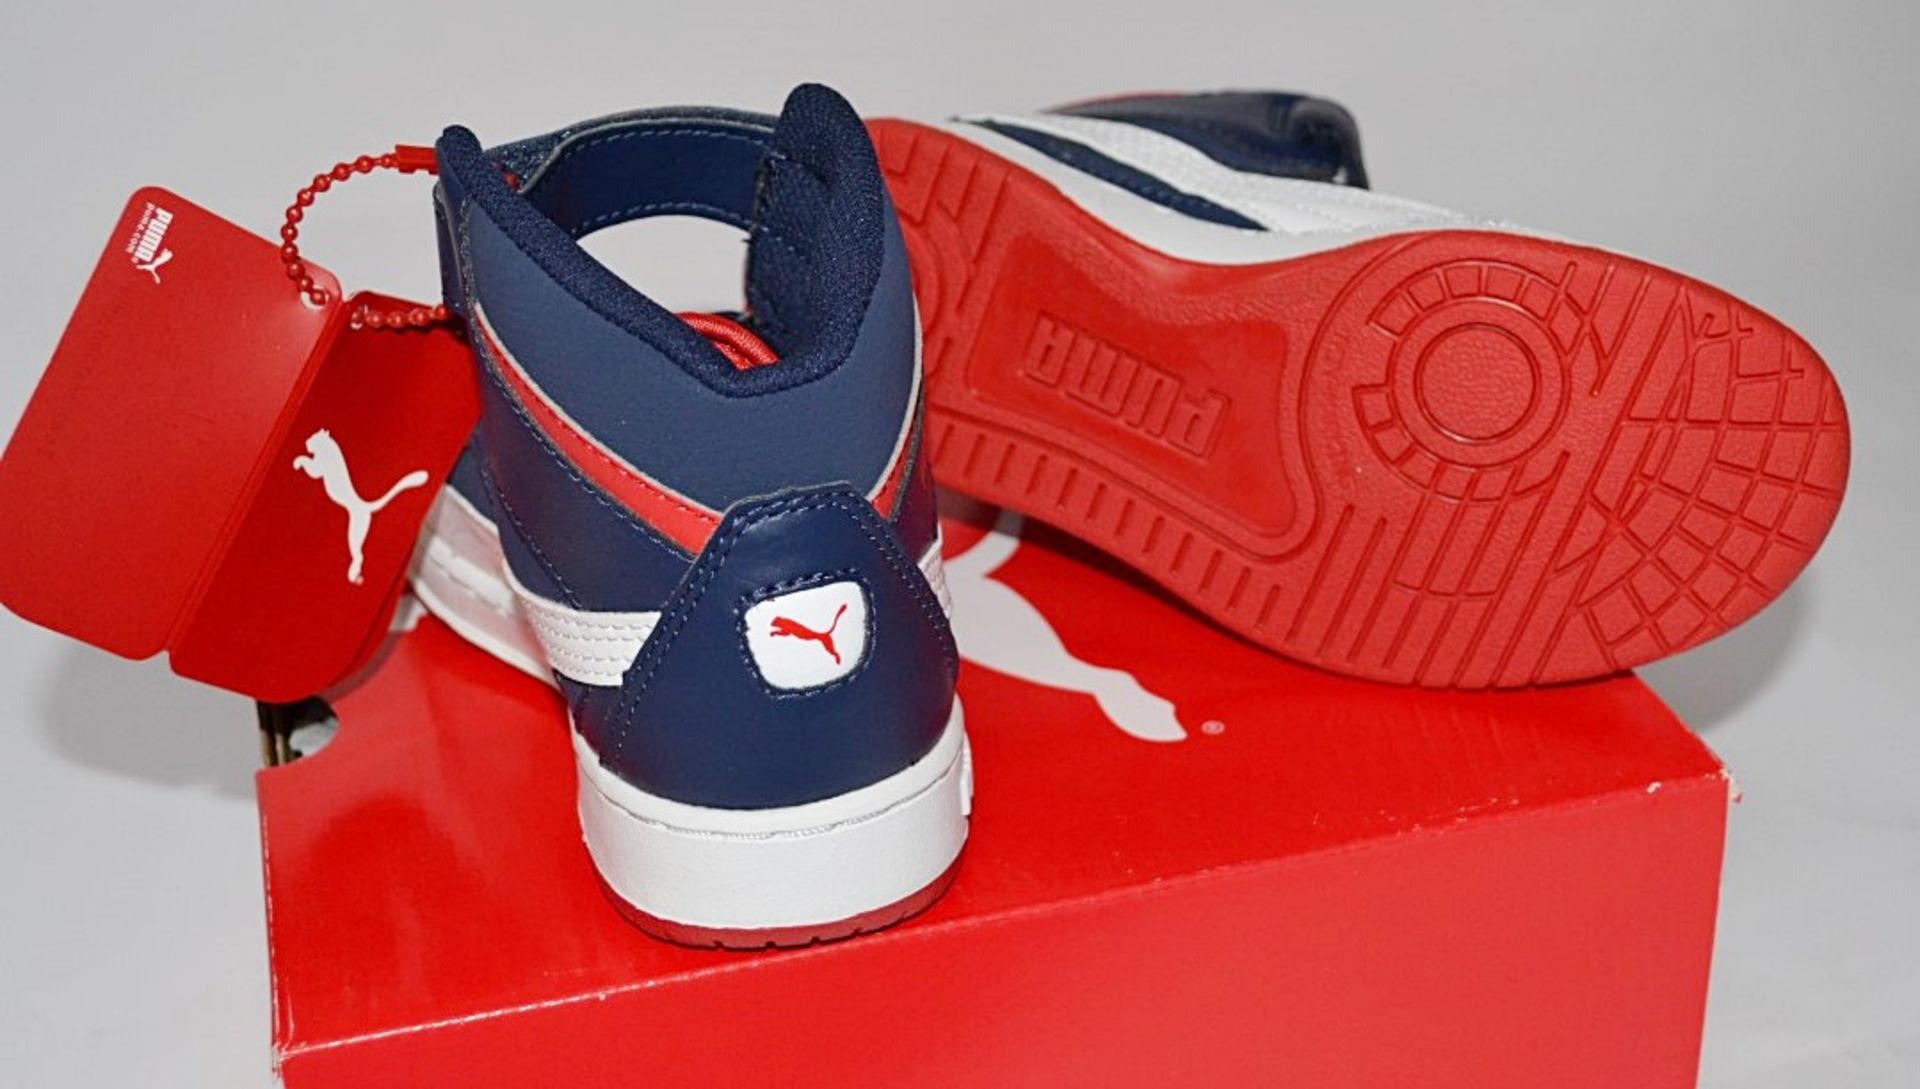 1 x Pair Of PUMA "Puma Rebound v2 Hi Kids" Trainers - Child Size: UK 12 - Colour: Red / Navy - CL155 - Image 2 of 4